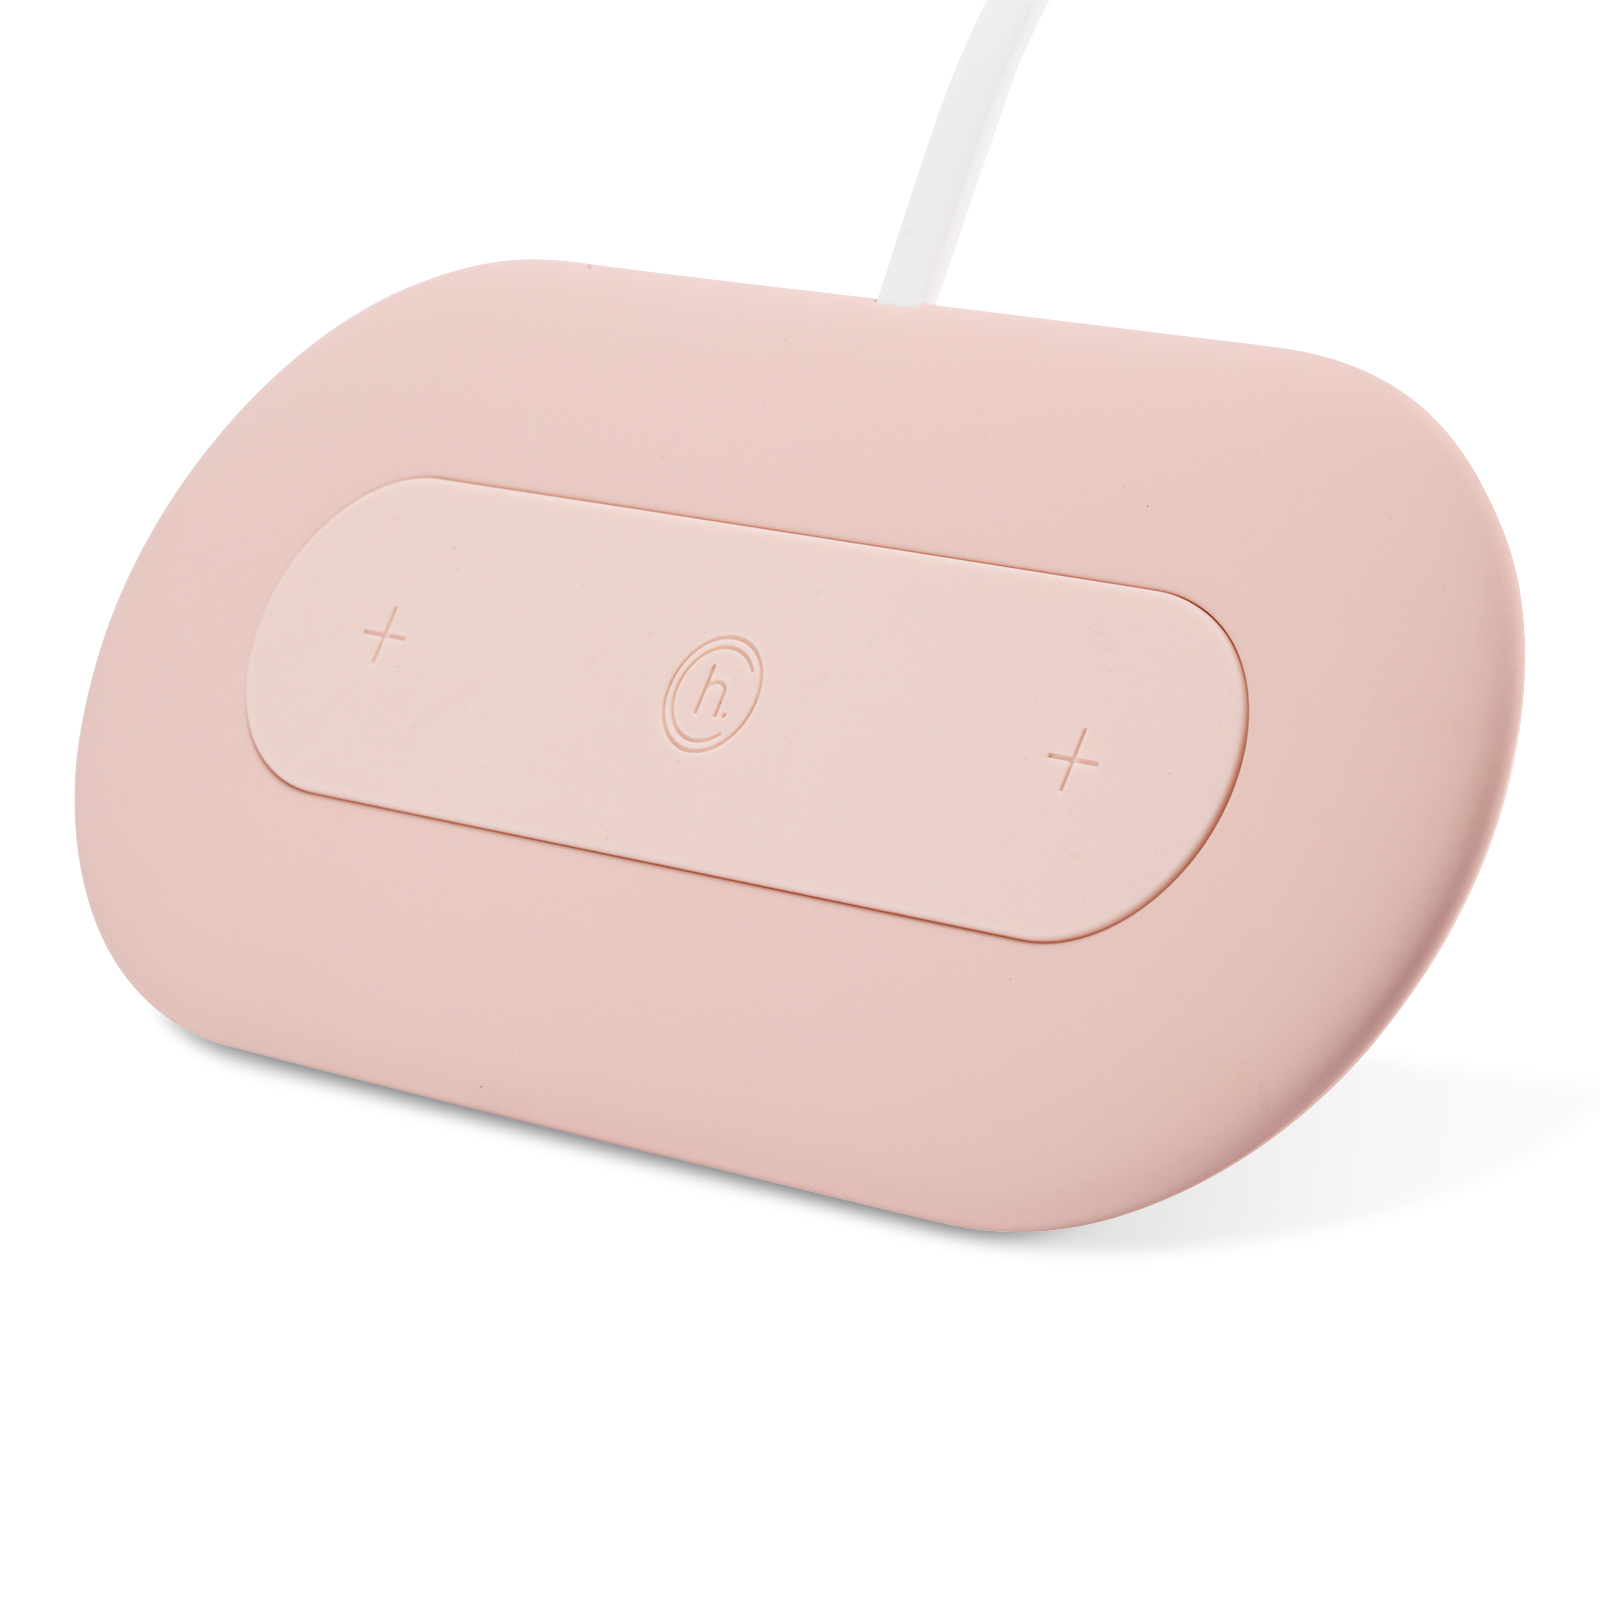 Wireless charger, double qi fast charge pad modena, blush pink